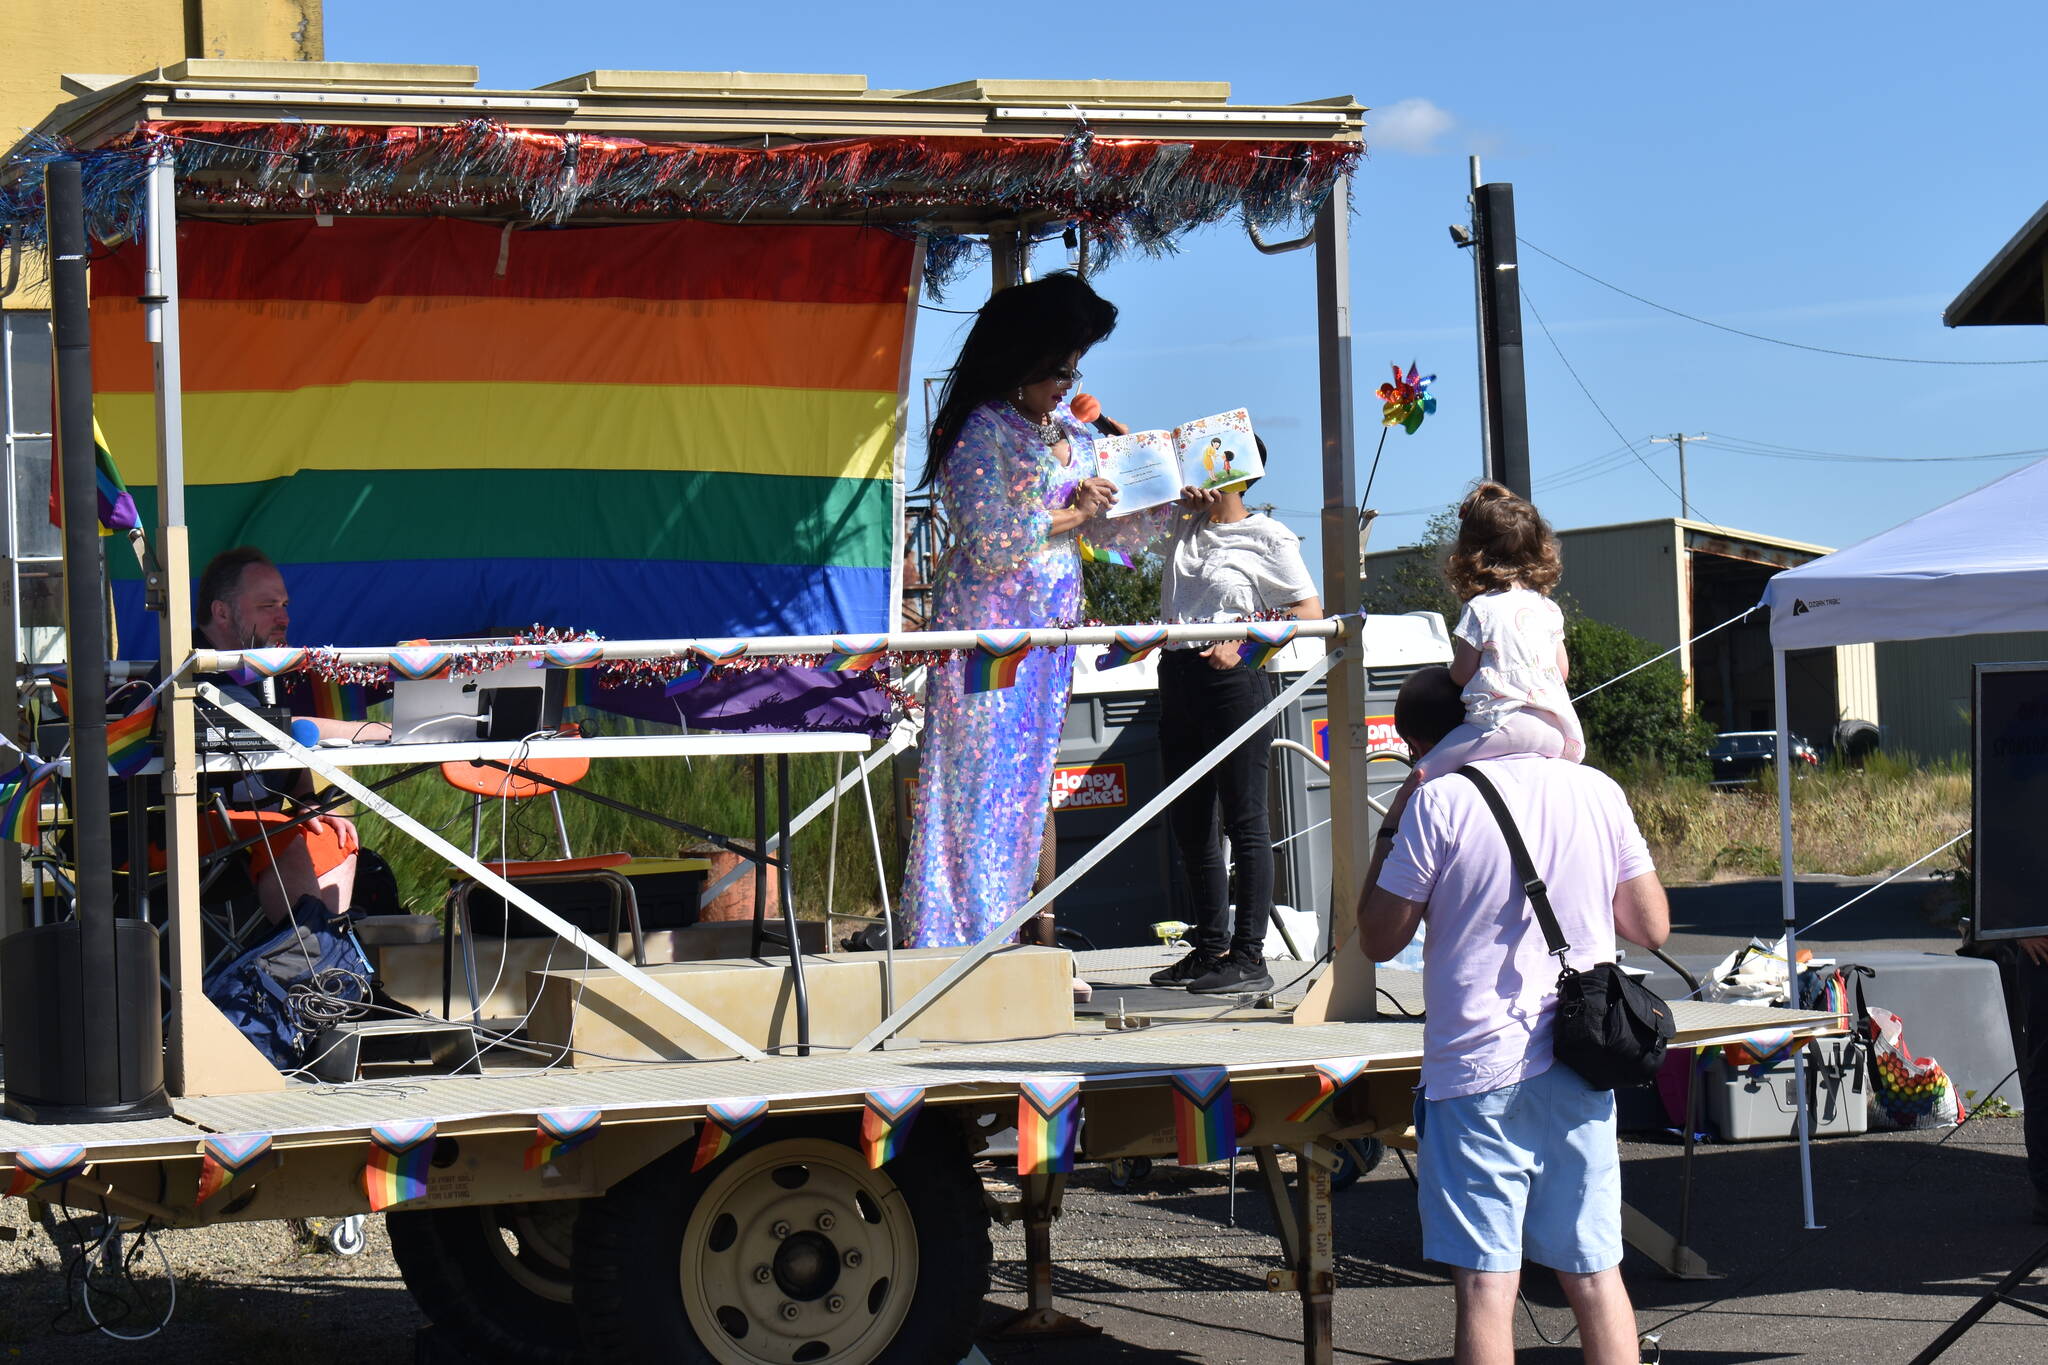 With drag being a popular format at pride festivals, children were given the opportunity to participate in Drag Queen Story Time at the 2022 Grays Harbor Pride Festival on Saturday at the Grays Harbor Historical Seaport in Aberdeen. (Allen Leister | The Daily World)